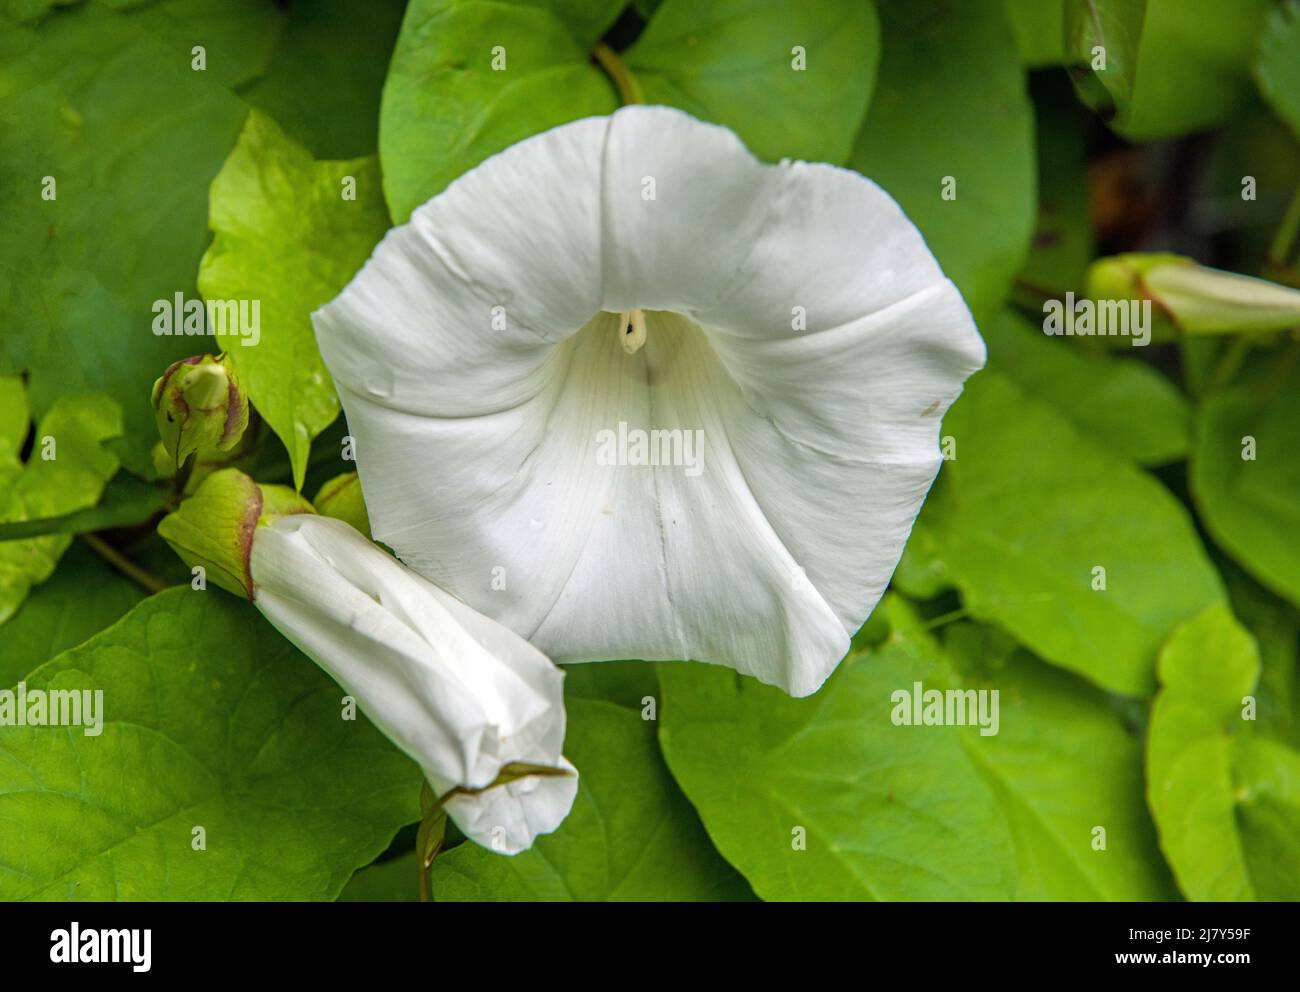 A weed detested by avid gardeners, the Bindweed is a prolific attacker of all plants garden. It twines itself around plants and slowly suffocates them Stock Photo